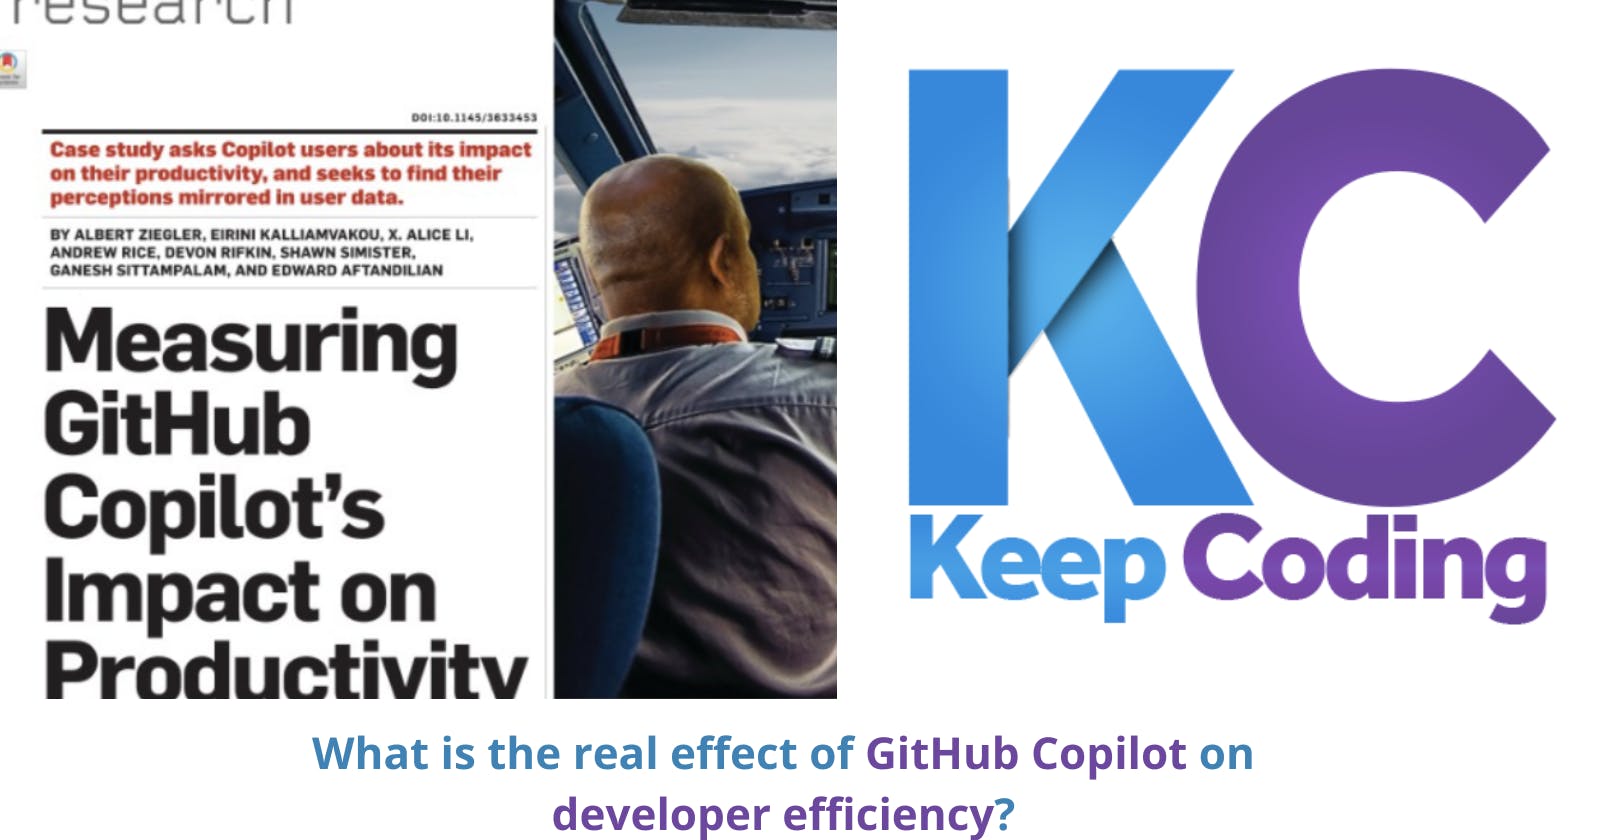 What is the real effect of GitHub Copilot on developer efficiency?